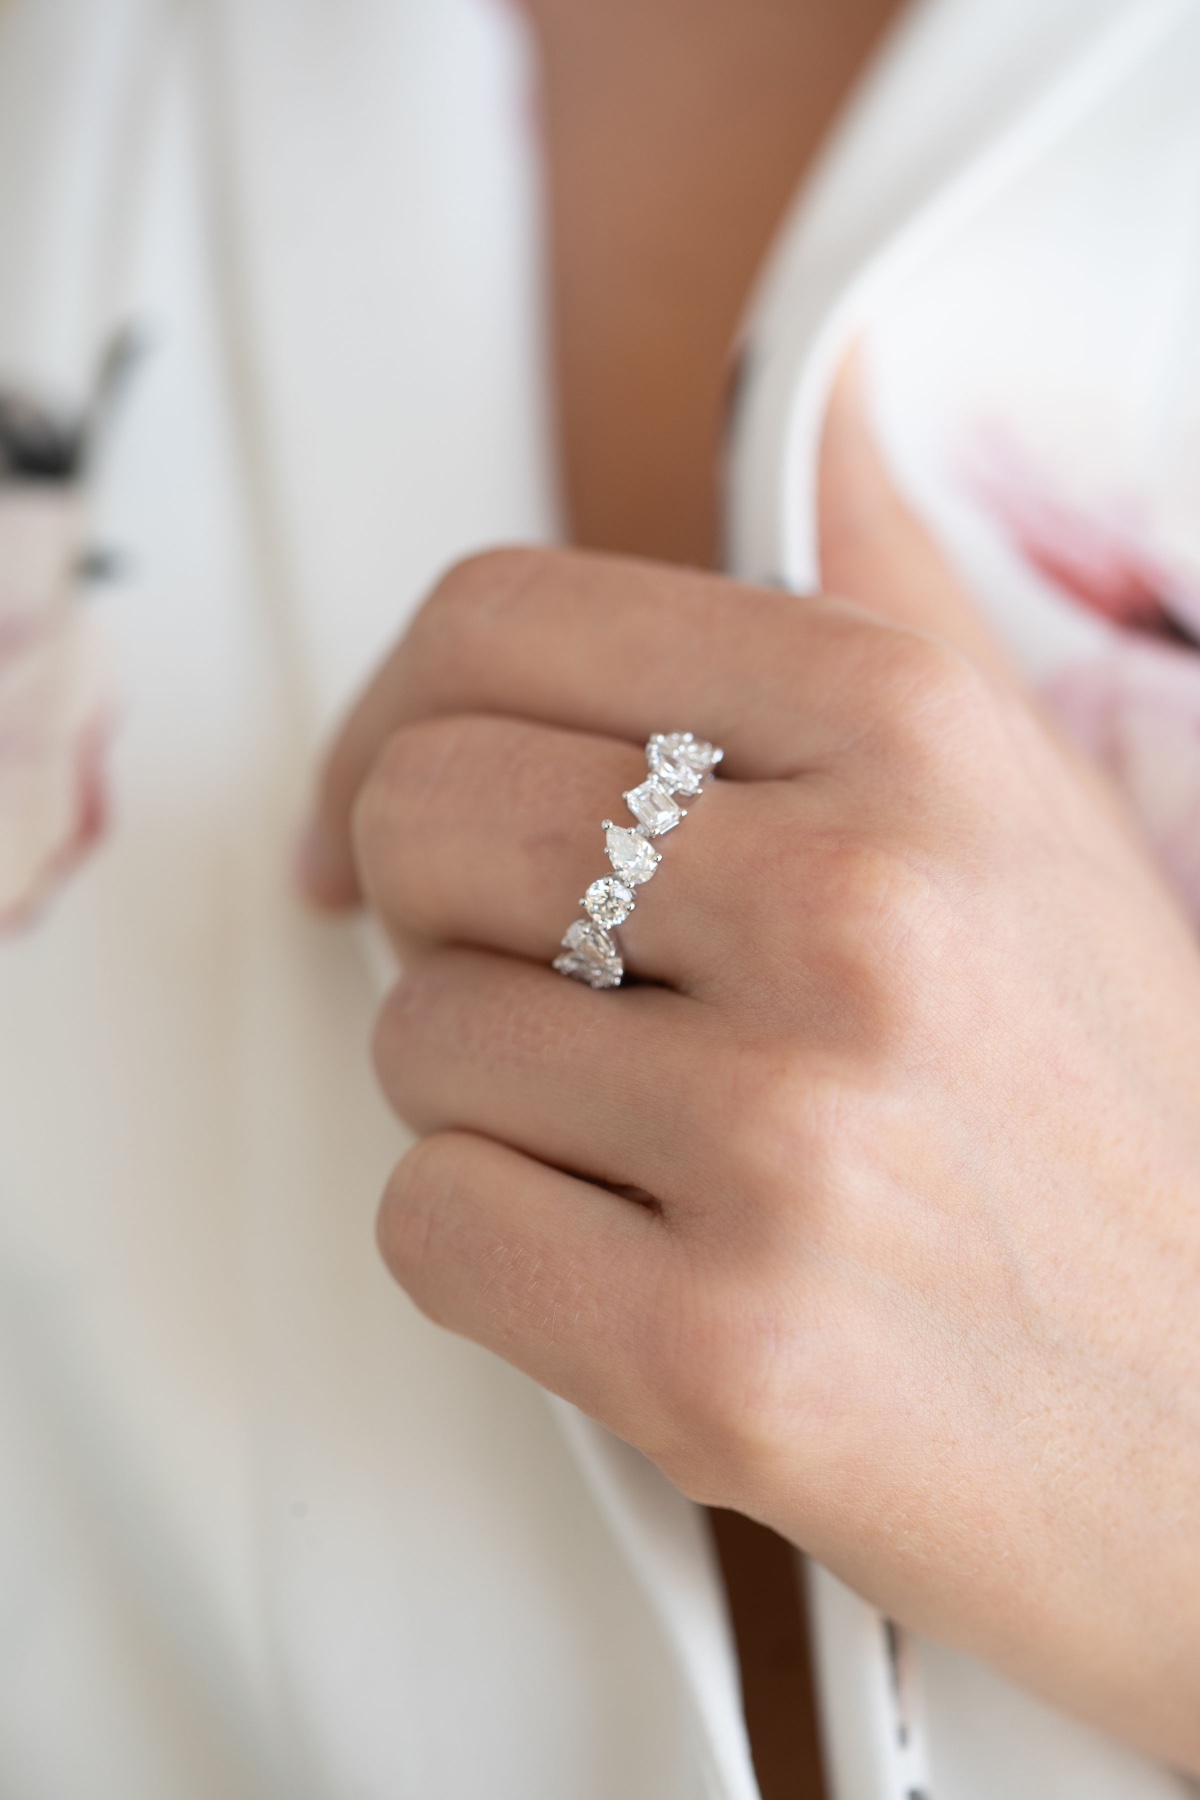 Intention Diamonds: The new, and fabulously inspiring diamond shopping trend